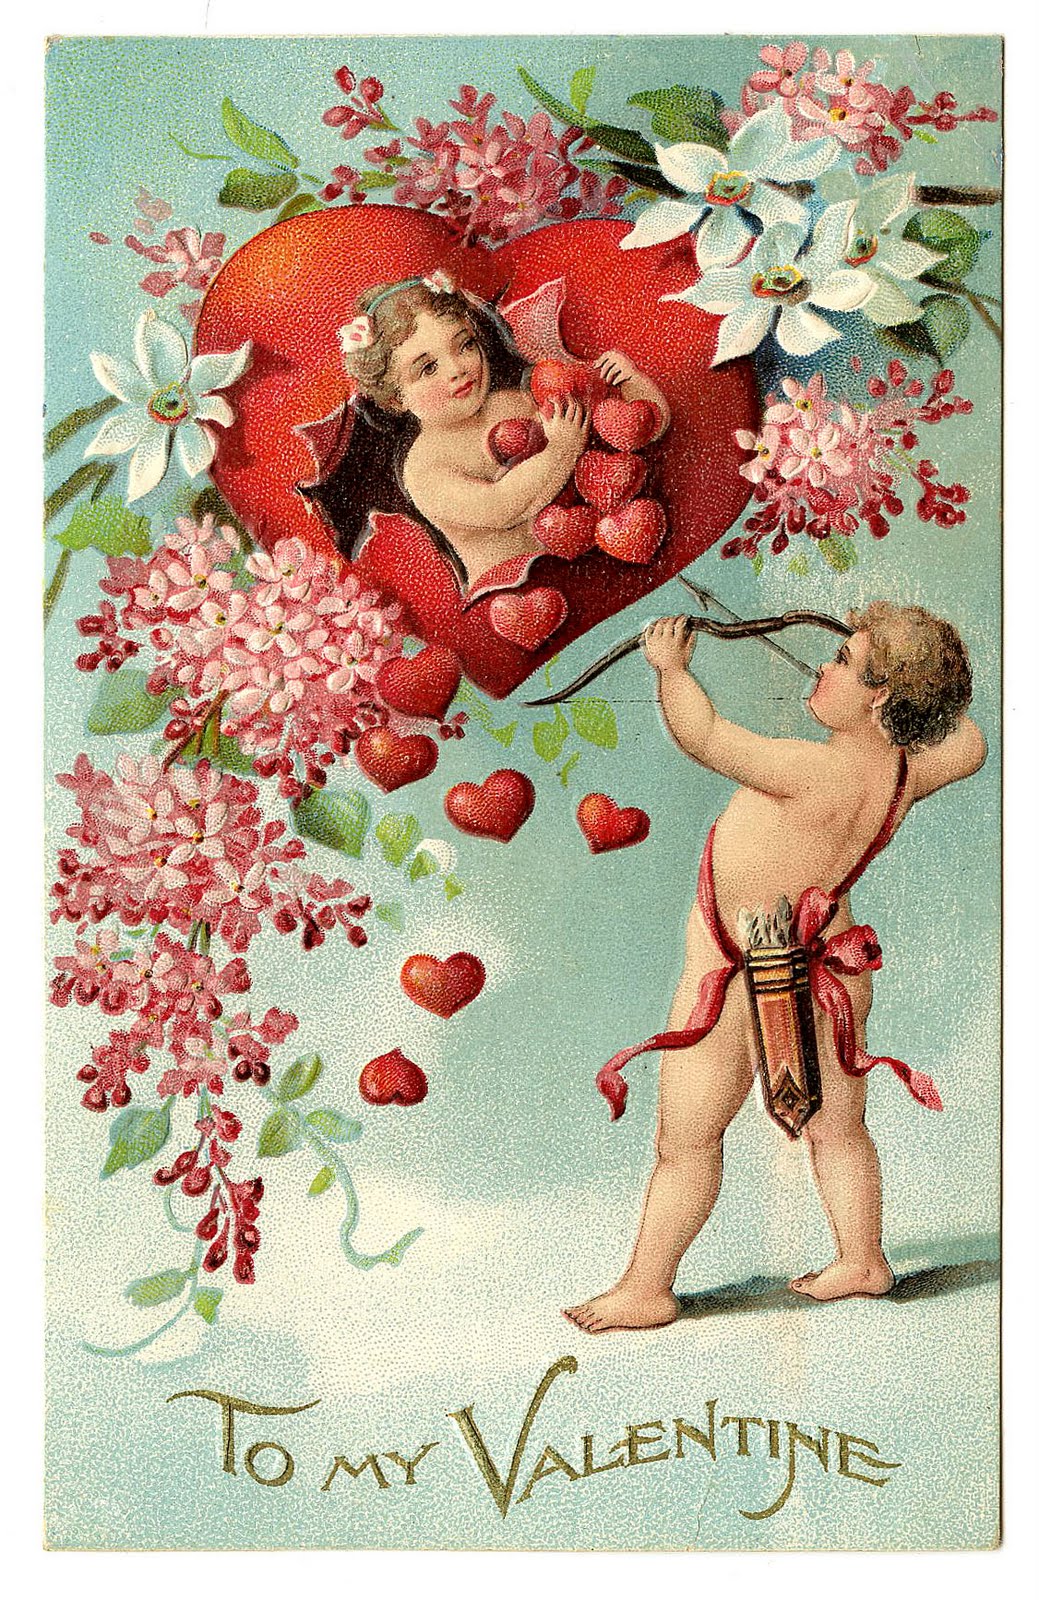 Vintage Clip Art   Valentine With Cherubs And Hearts   The Graphics